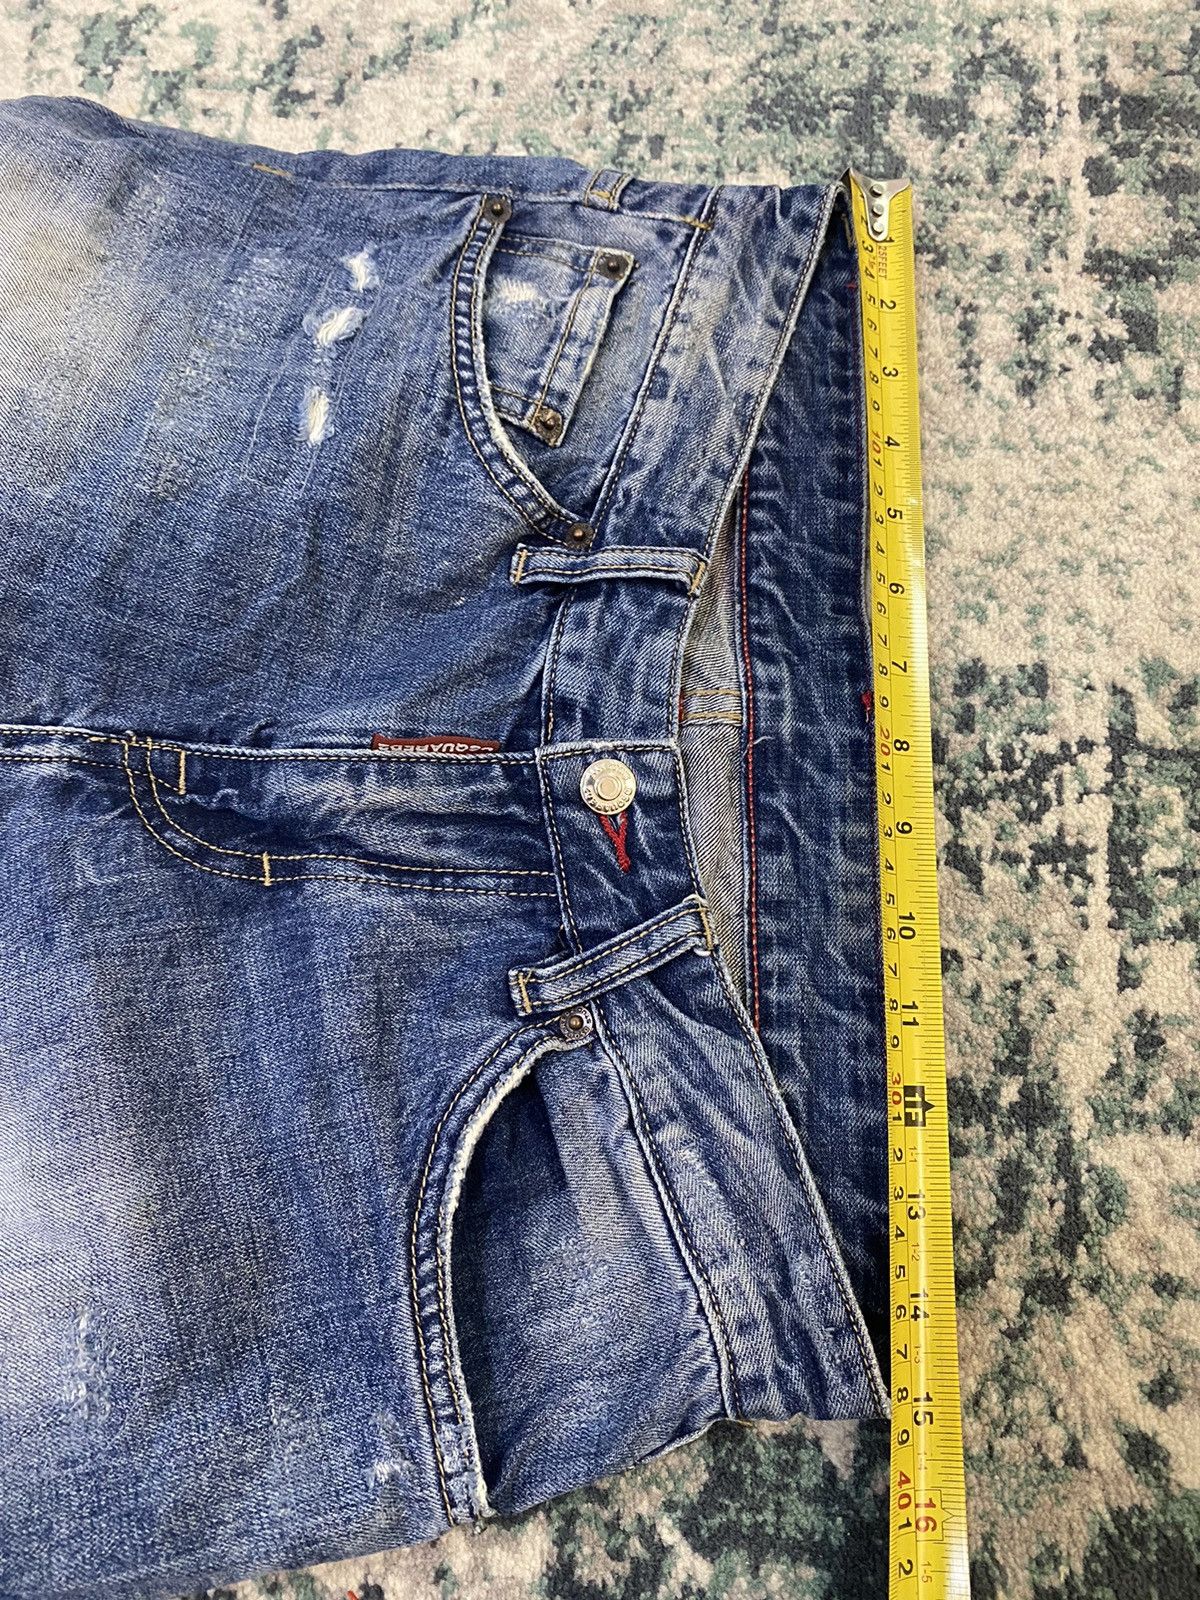 Dsquared2 Made in Italy Denim Distressed Jeans - 16